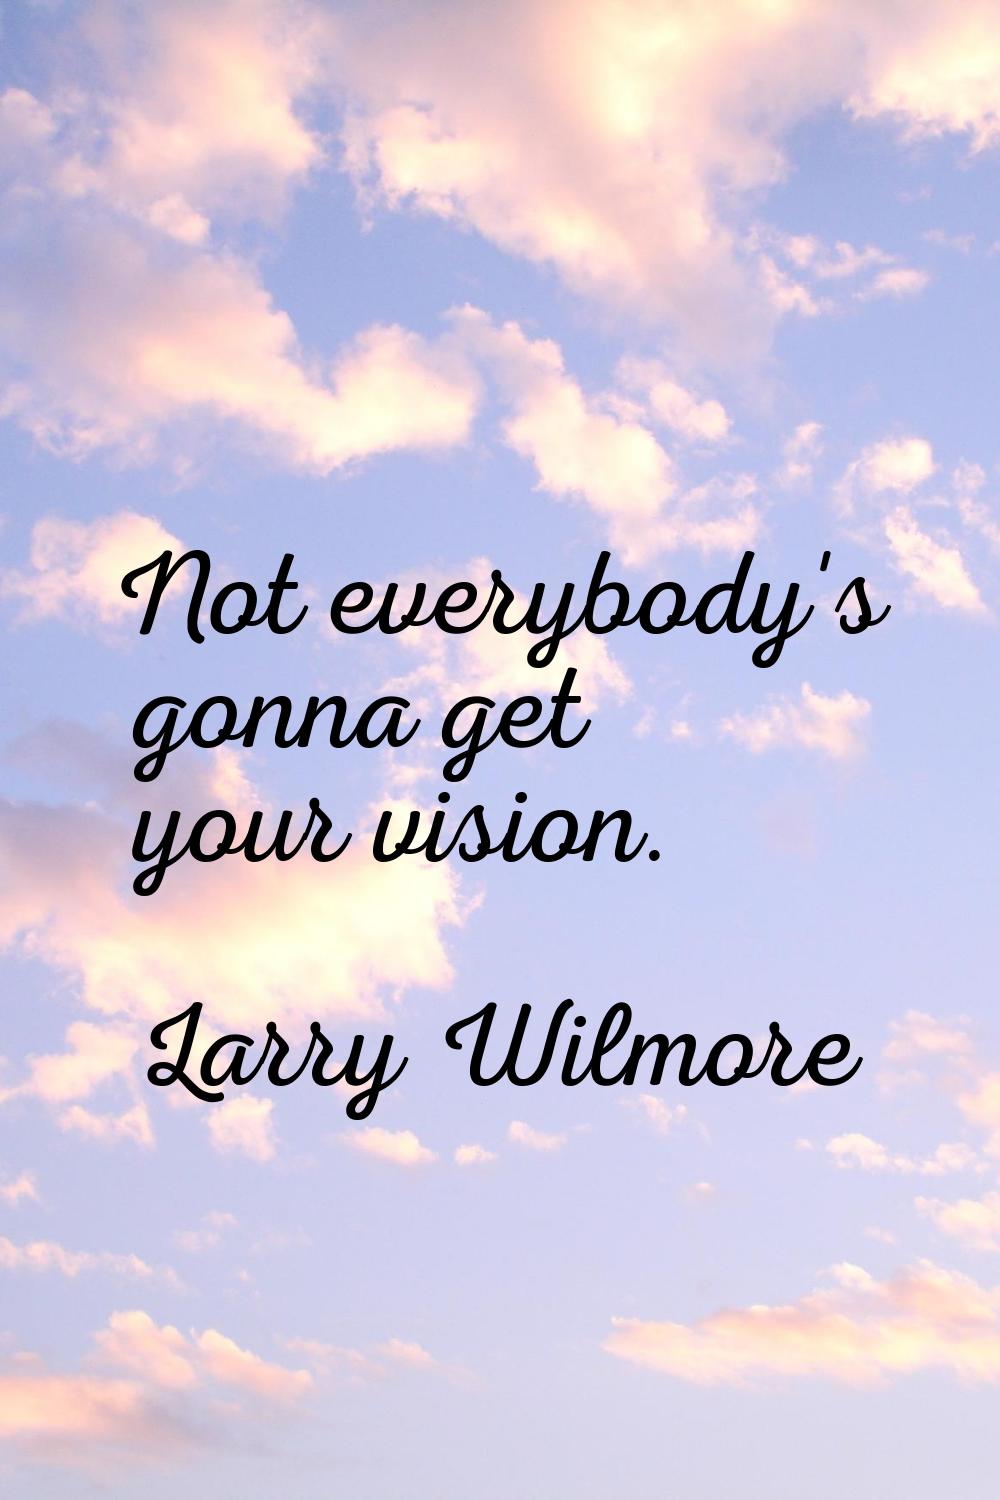 Not everybody's gonna get your vision.